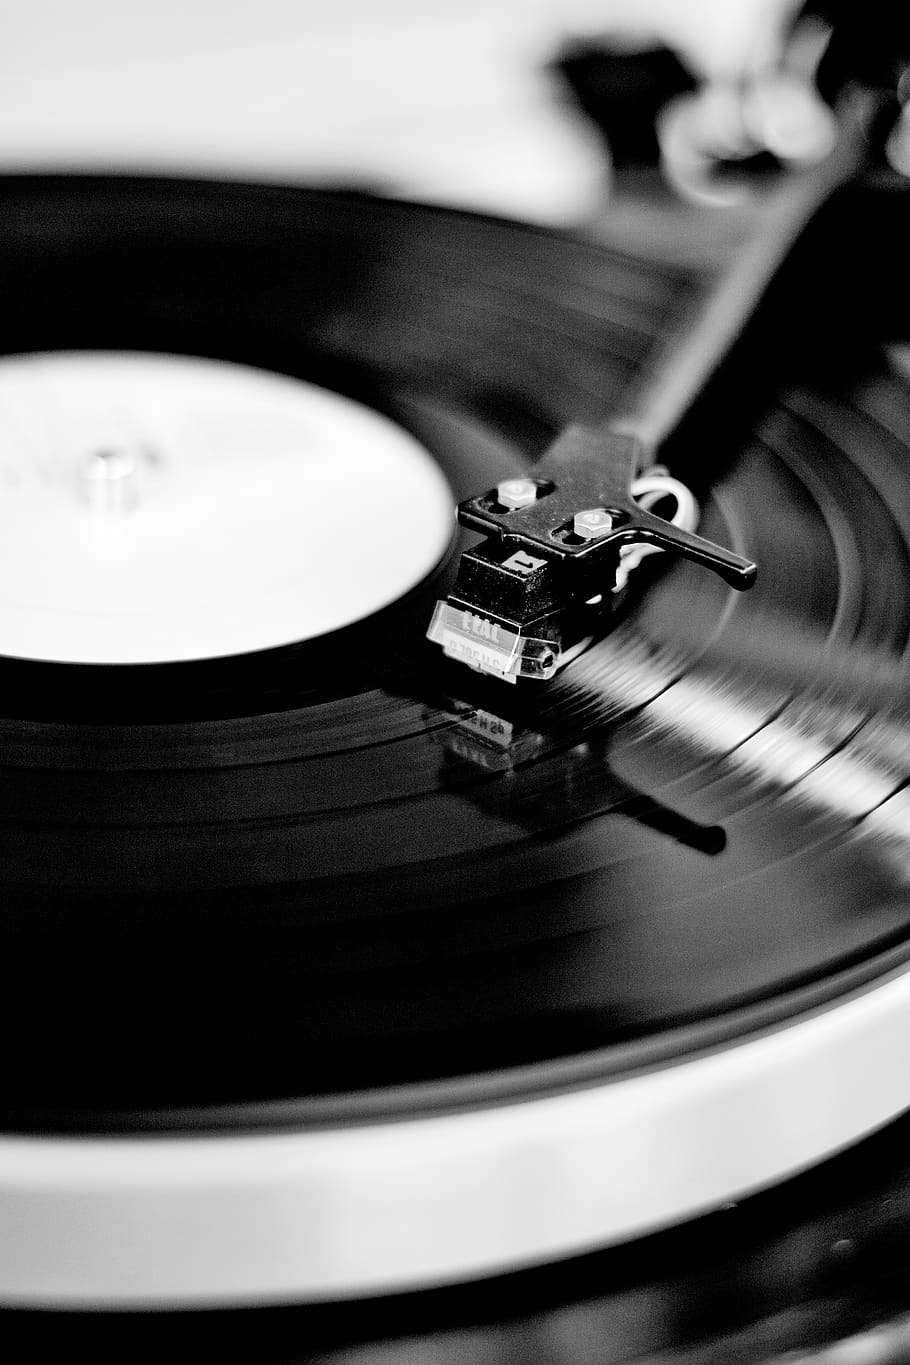 HD wallpaper black and gray turntable brown and gray vinyl record player  on floor  Wallpaper Flare